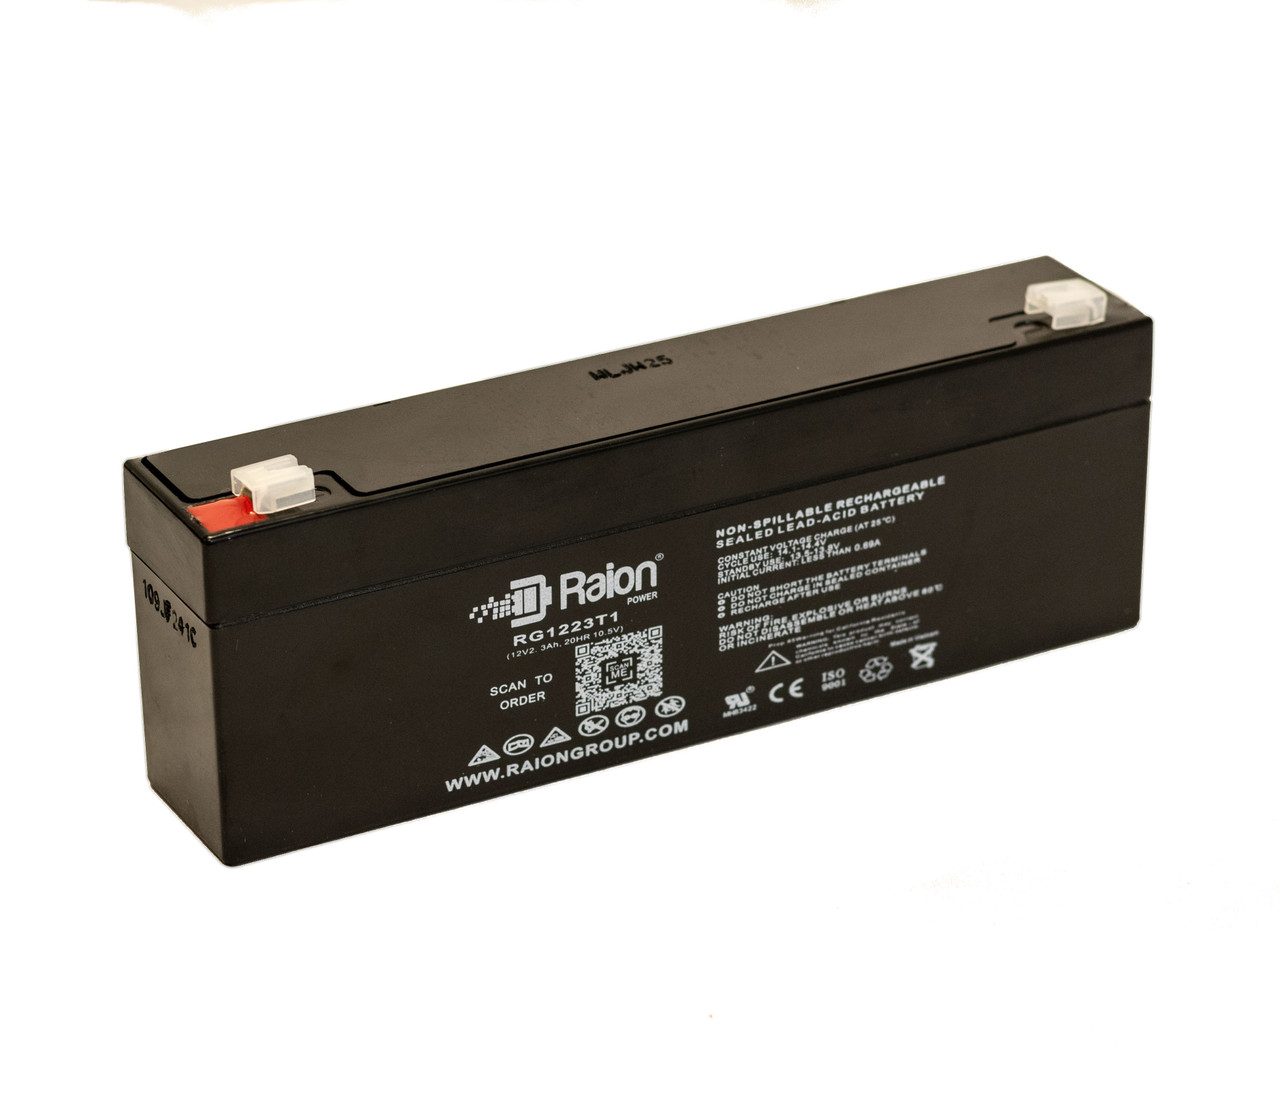 Raion Power RG1223T1 Replacement Battery for Nihon Kohden 5151 CardioFax ECG